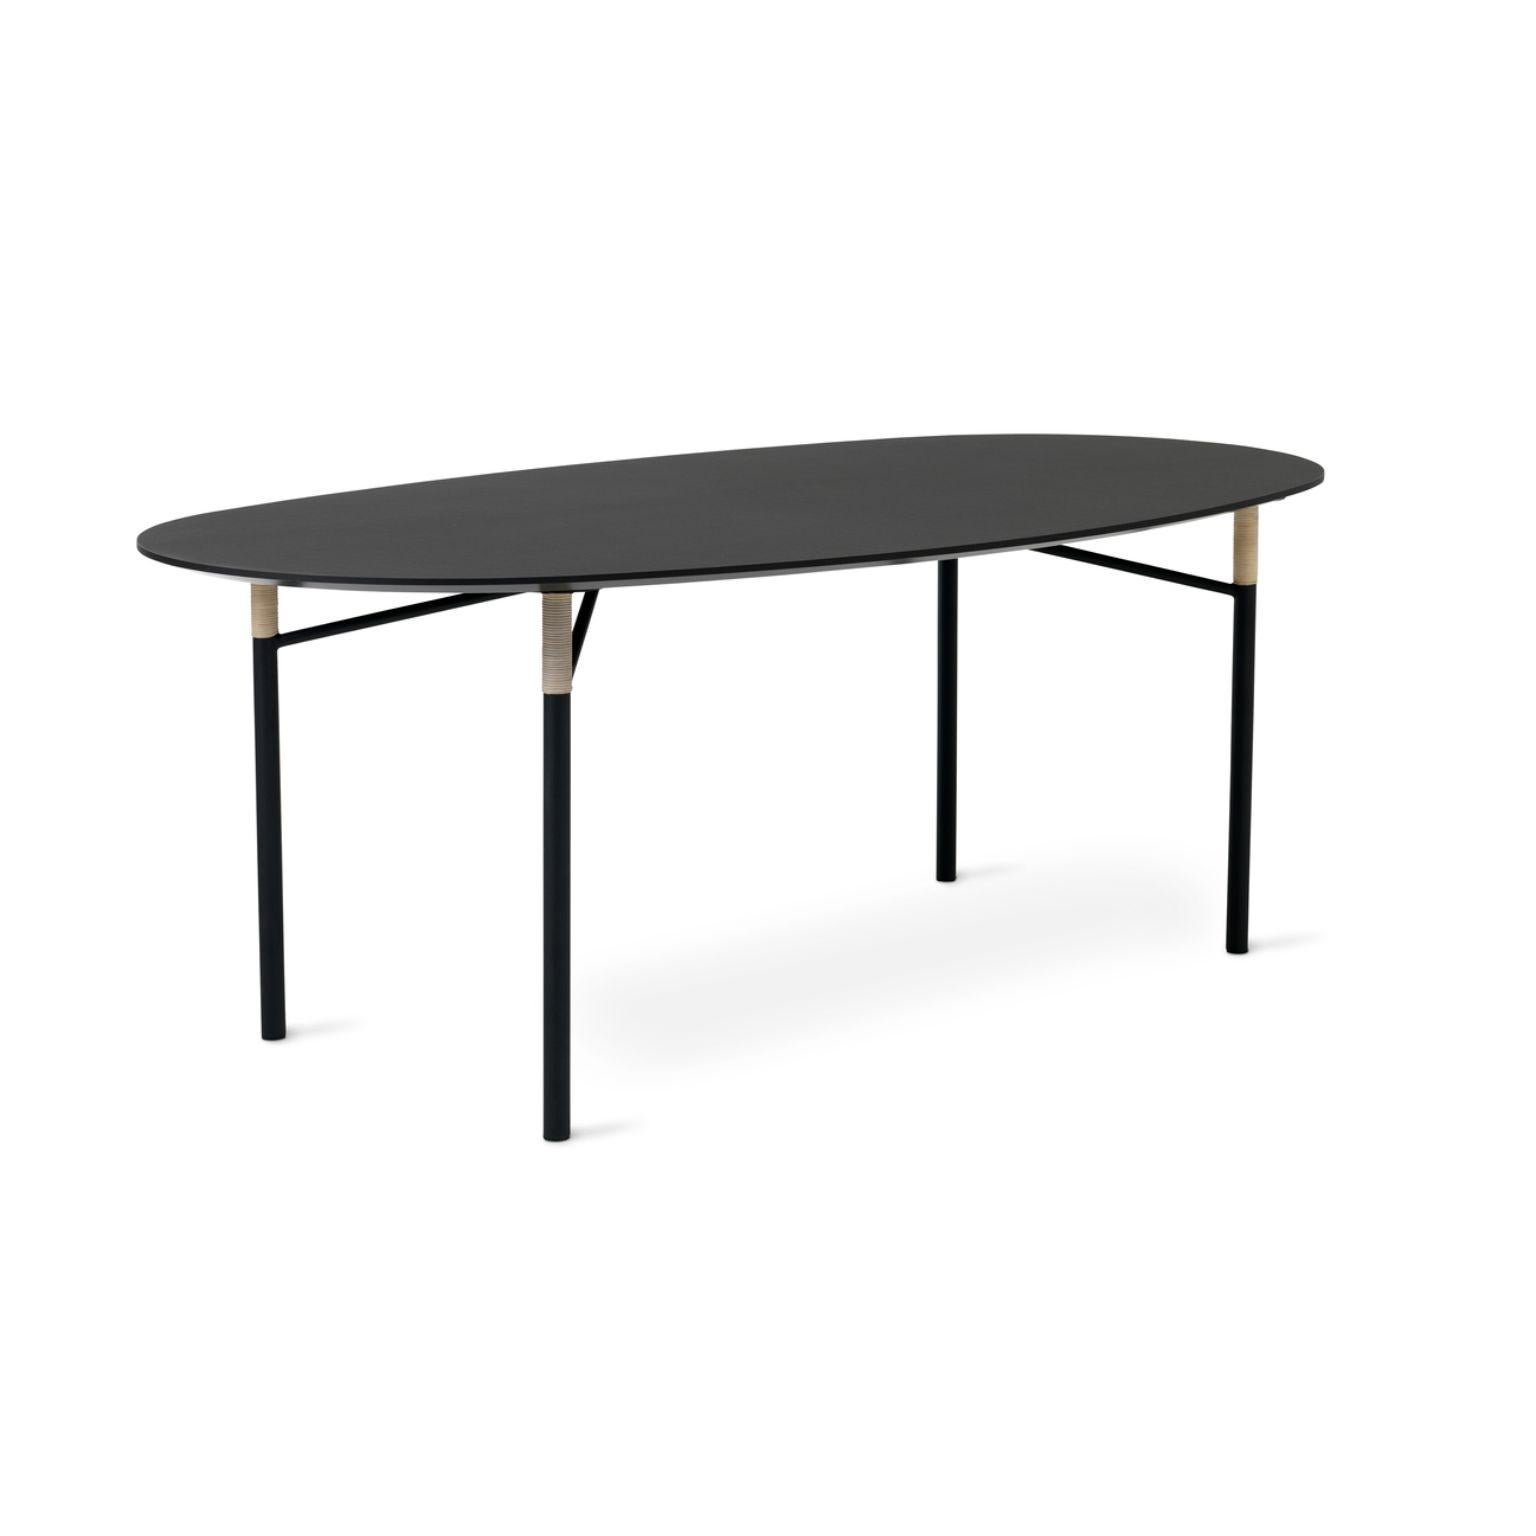 Affinity Ellipse dining table black by Warm Nordic
Dimensions: D200 x W108 x H75 cm
Material: Linoleum, MDF tabletop, Powder coated steel legs, Cane wrappings
Weight: 26 kg

Warm Nordic is an ambitious design brand anchored in Nordic design